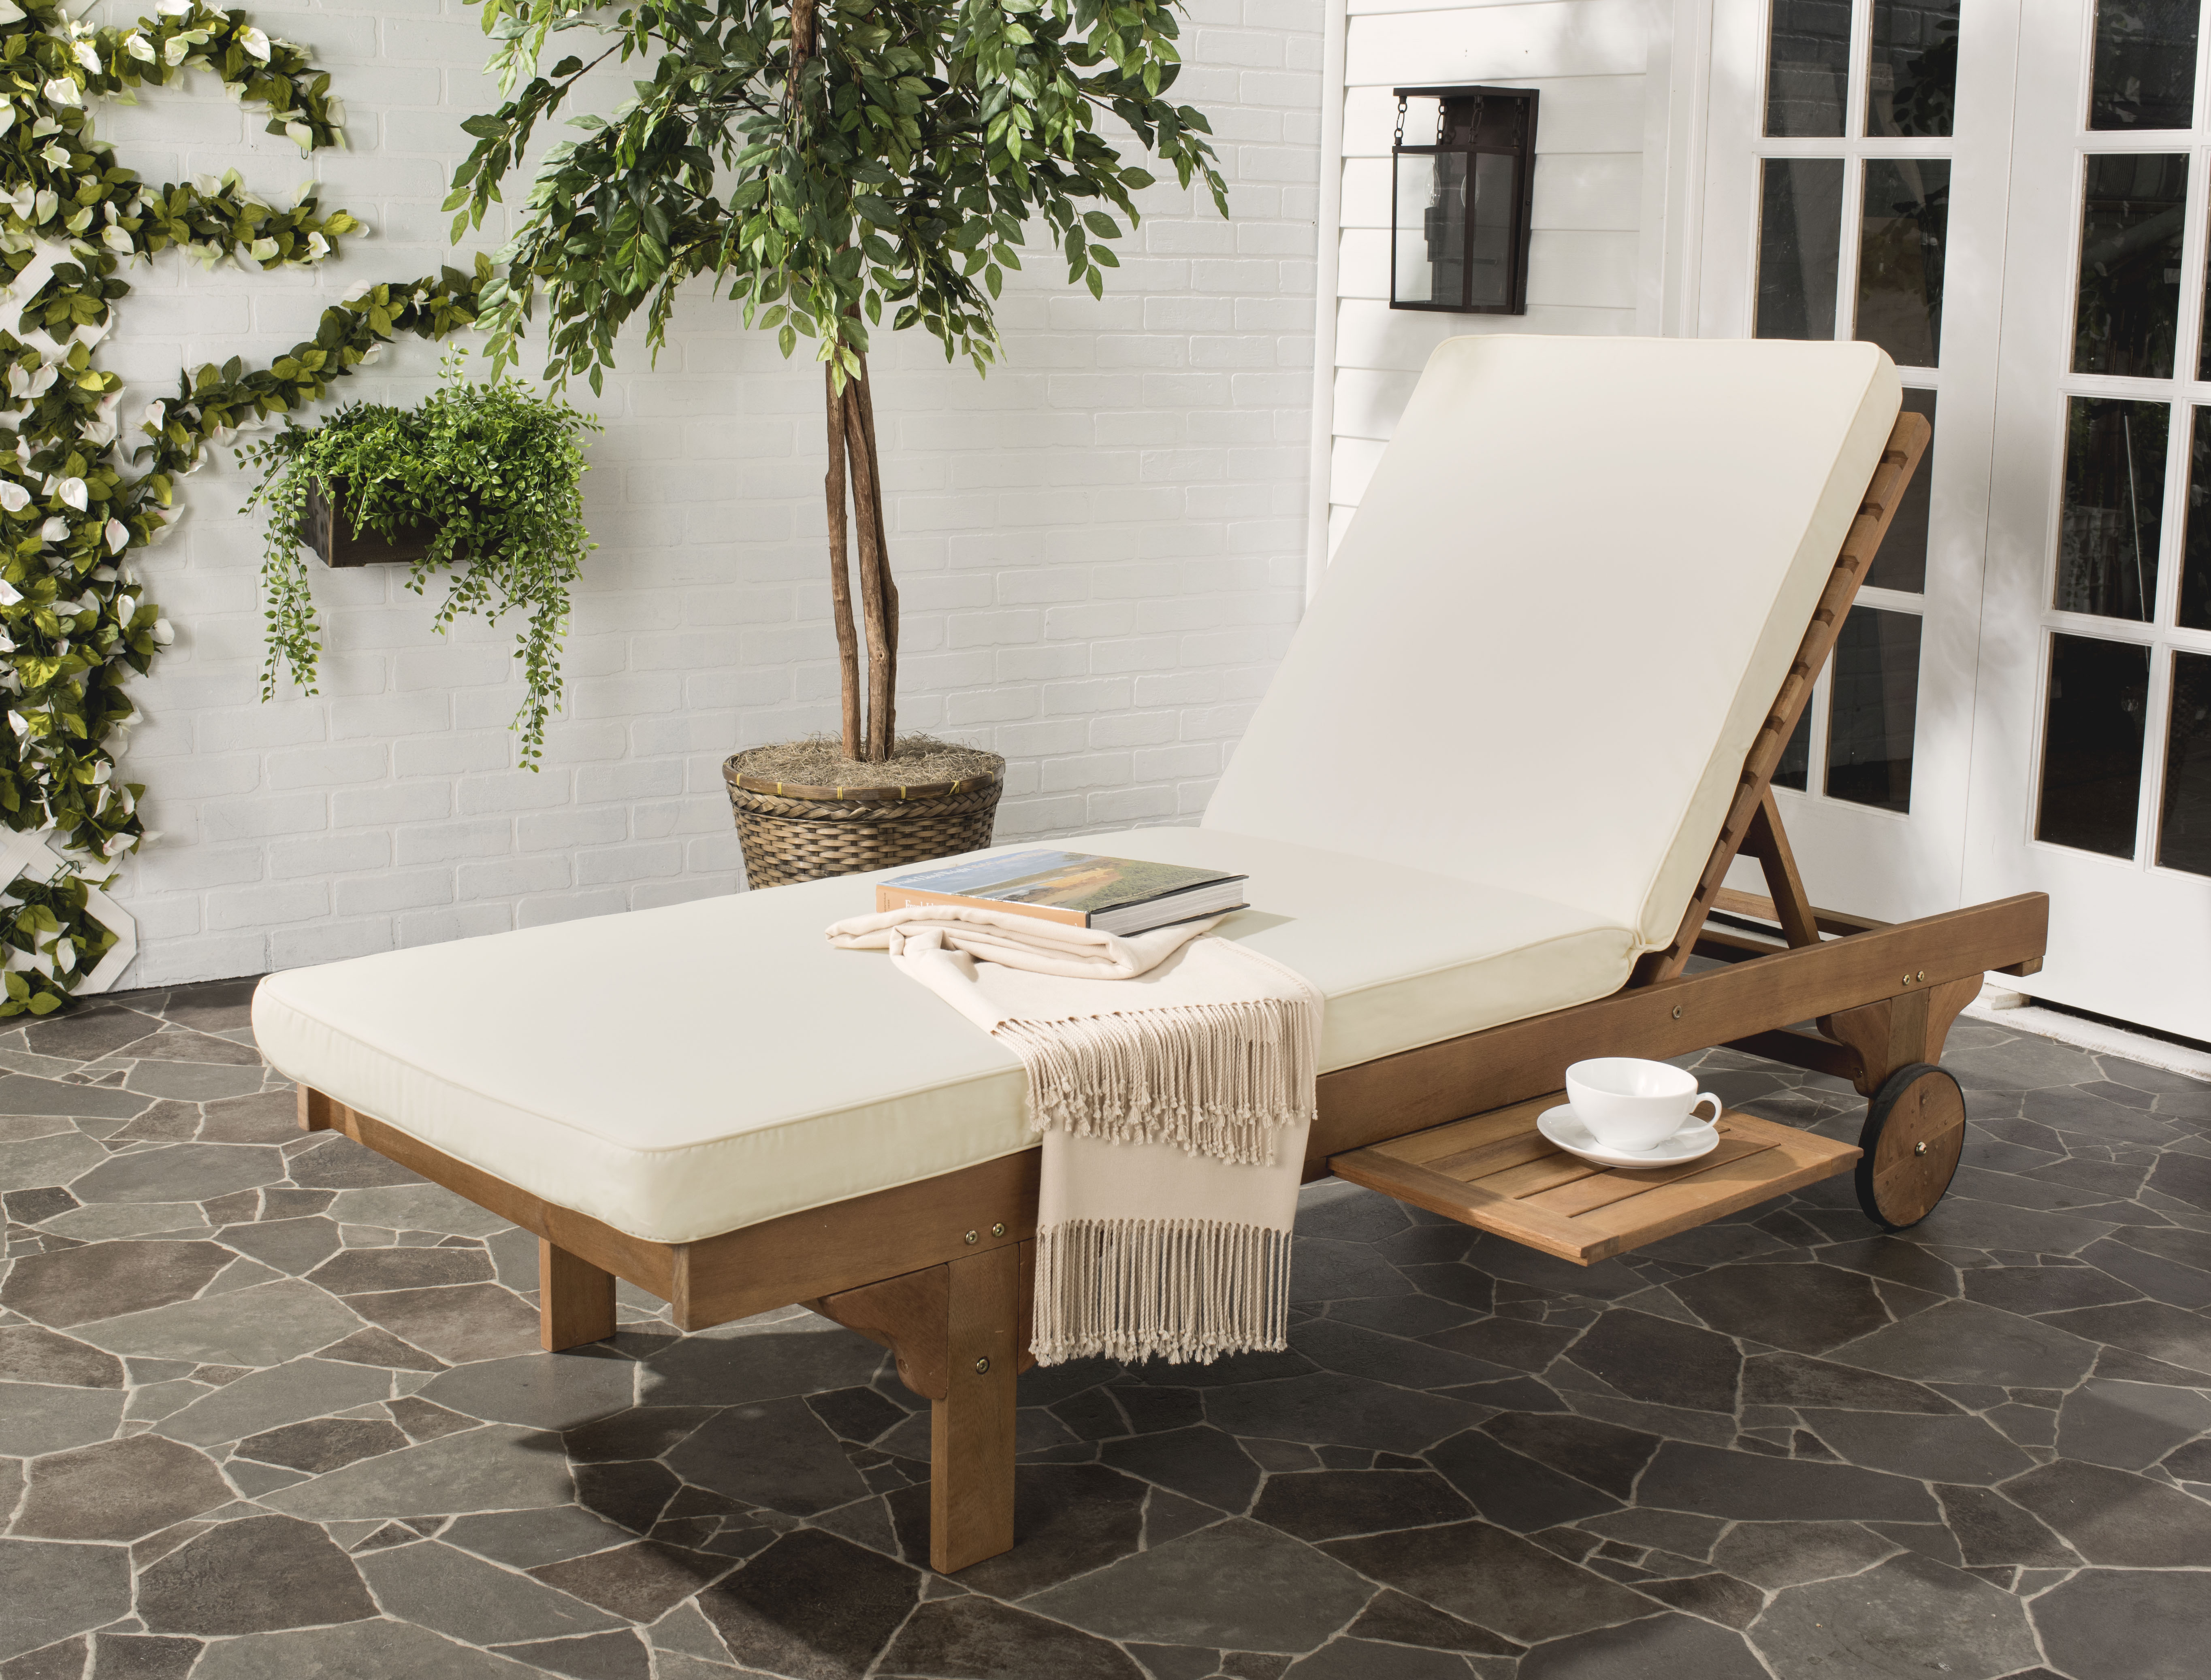 SAFAVIEH Outdoor Collection Newport Chaise Chair & Side Table Natural/Beige - image 1 of 9